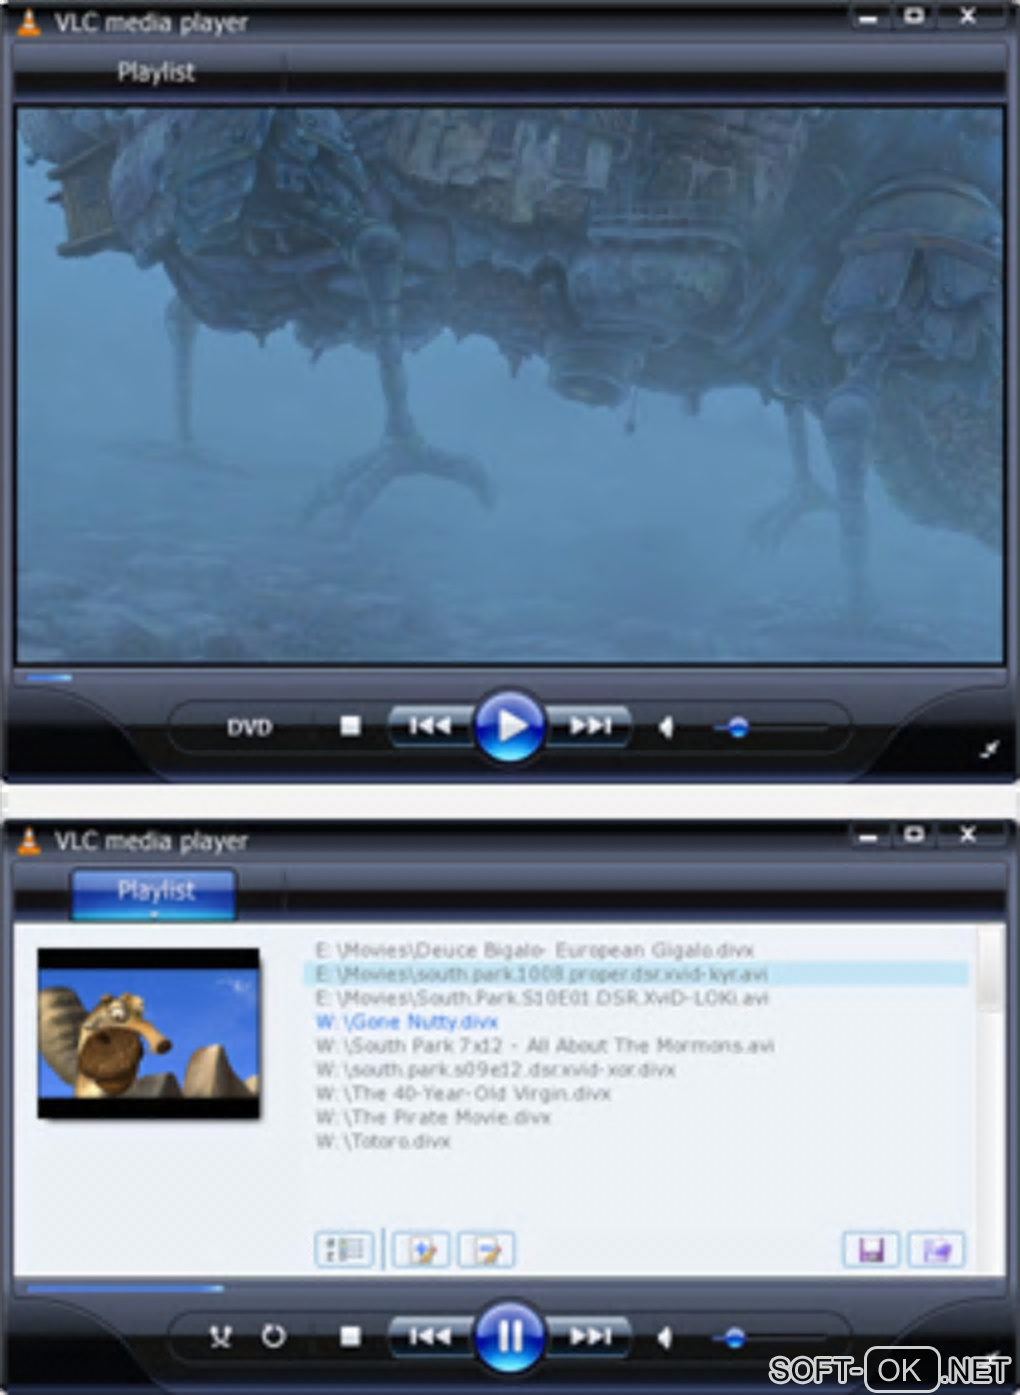 The appearance "VLC media player Skins Pack"